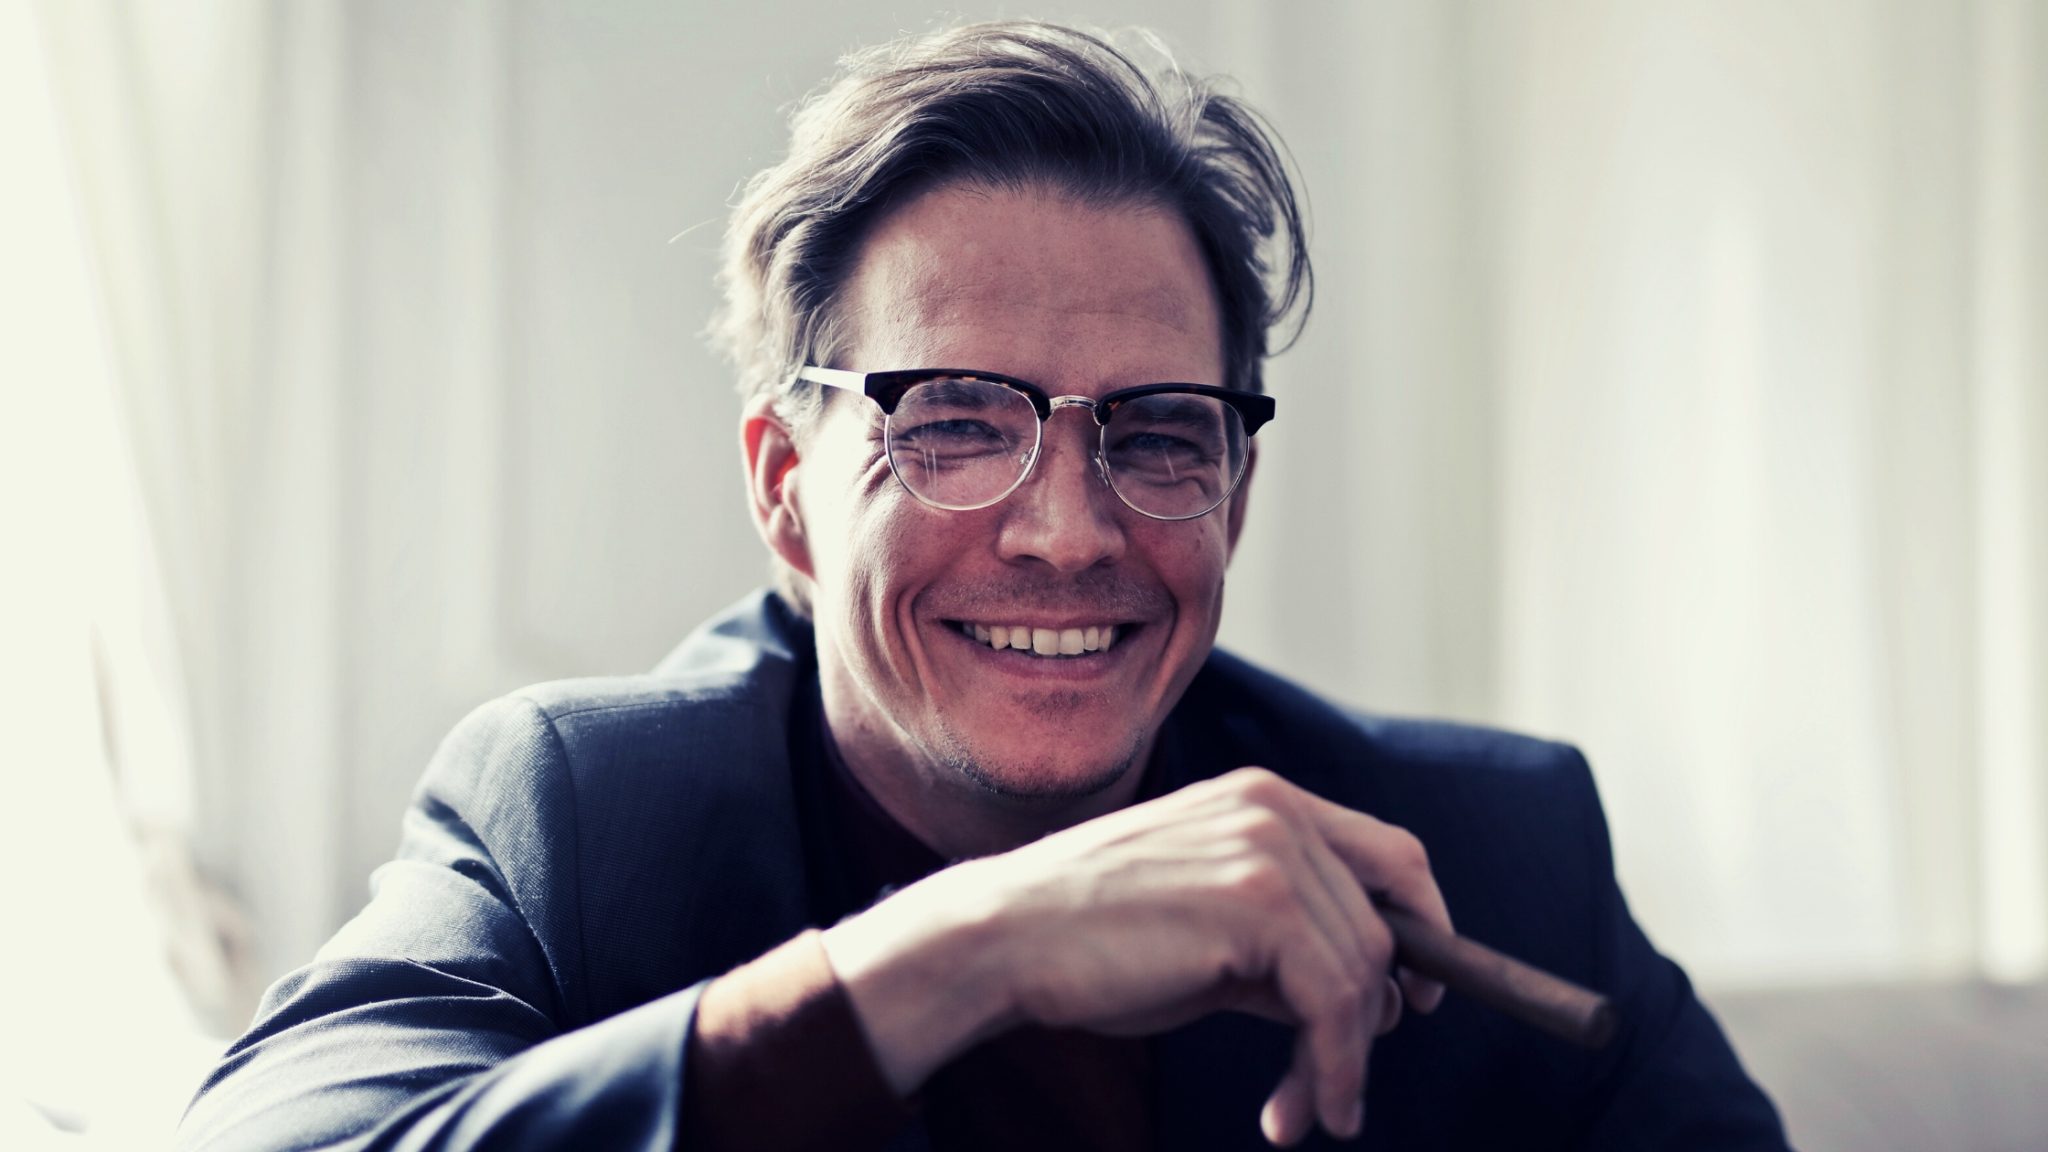 Male business coach, over 40 years old, wearing glasses and smiling.